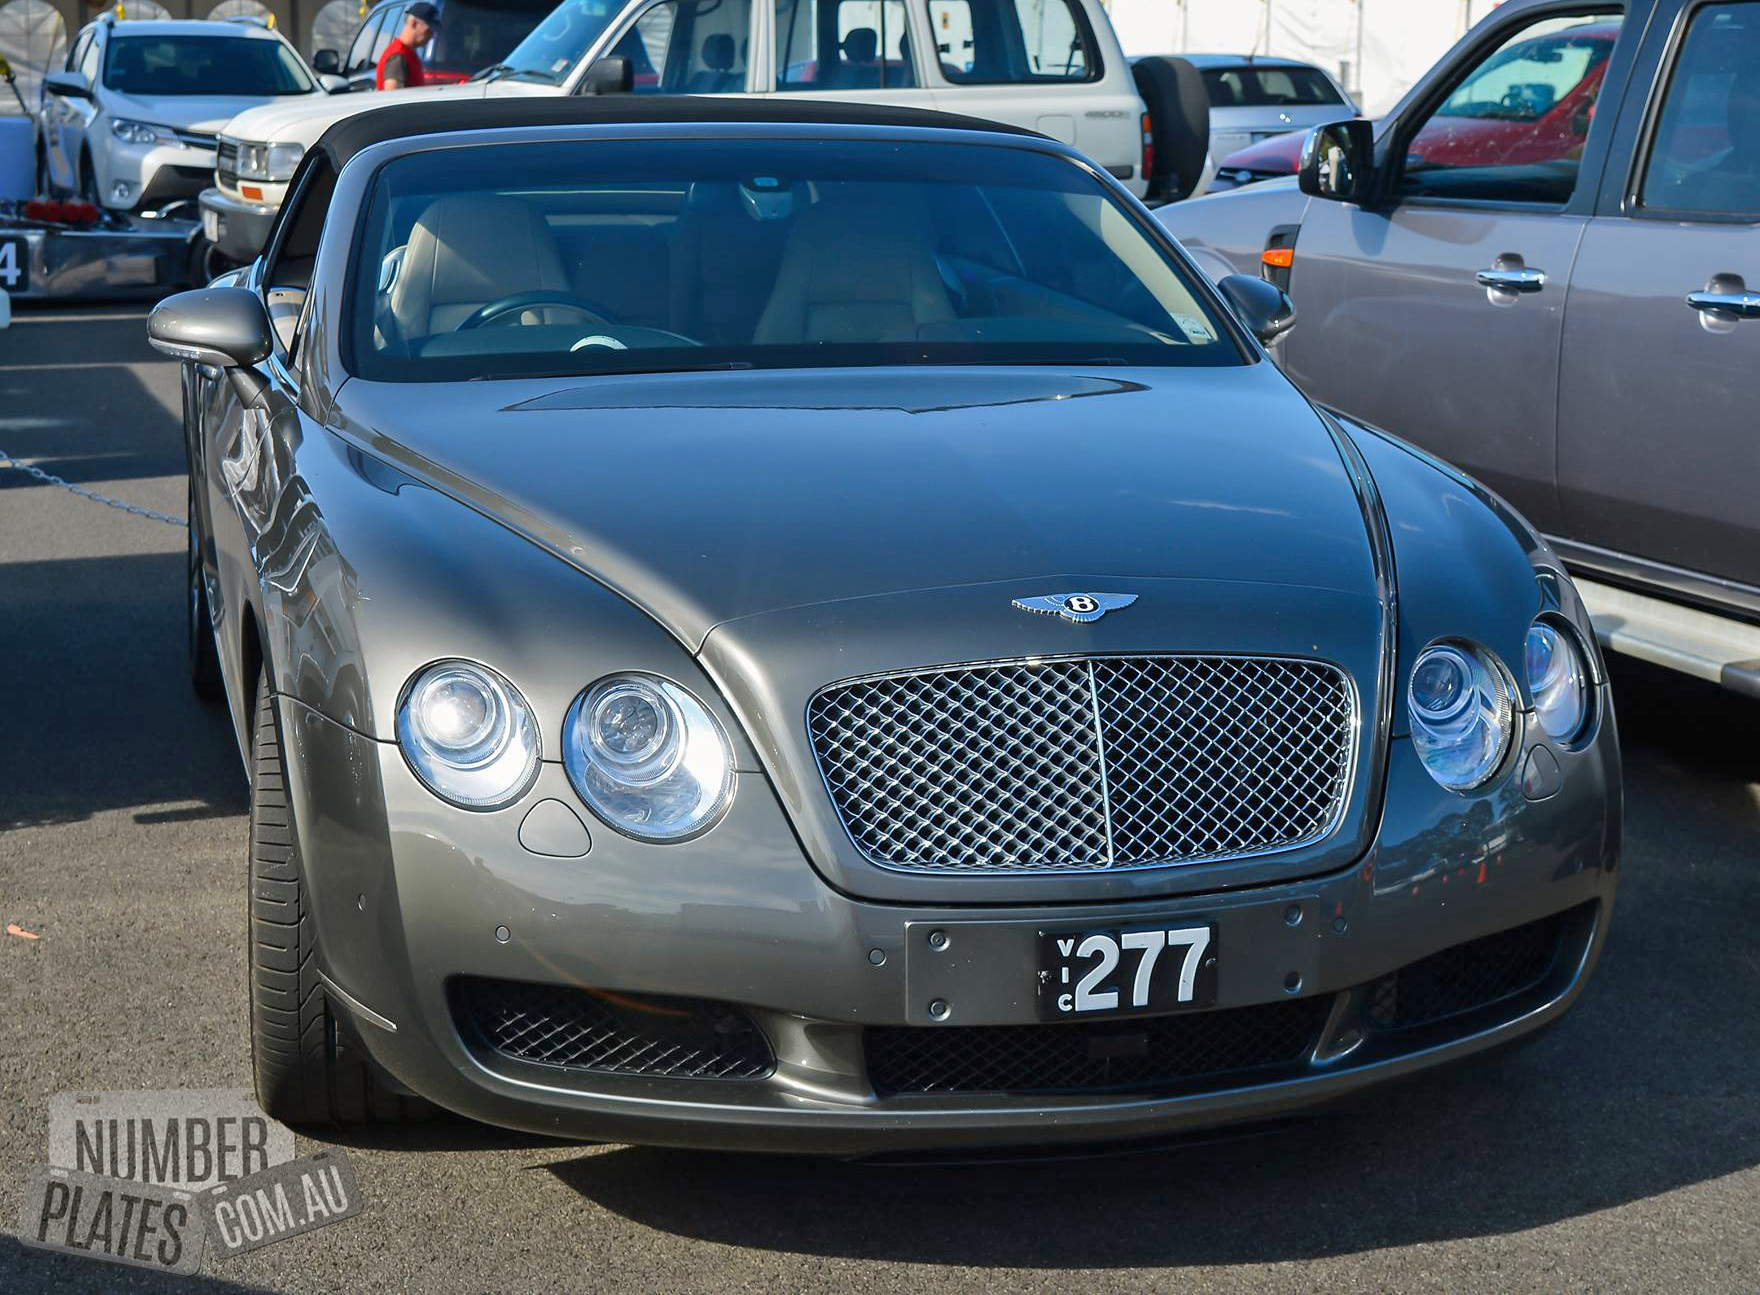 Vic '277' on a Bentley Continental GTC